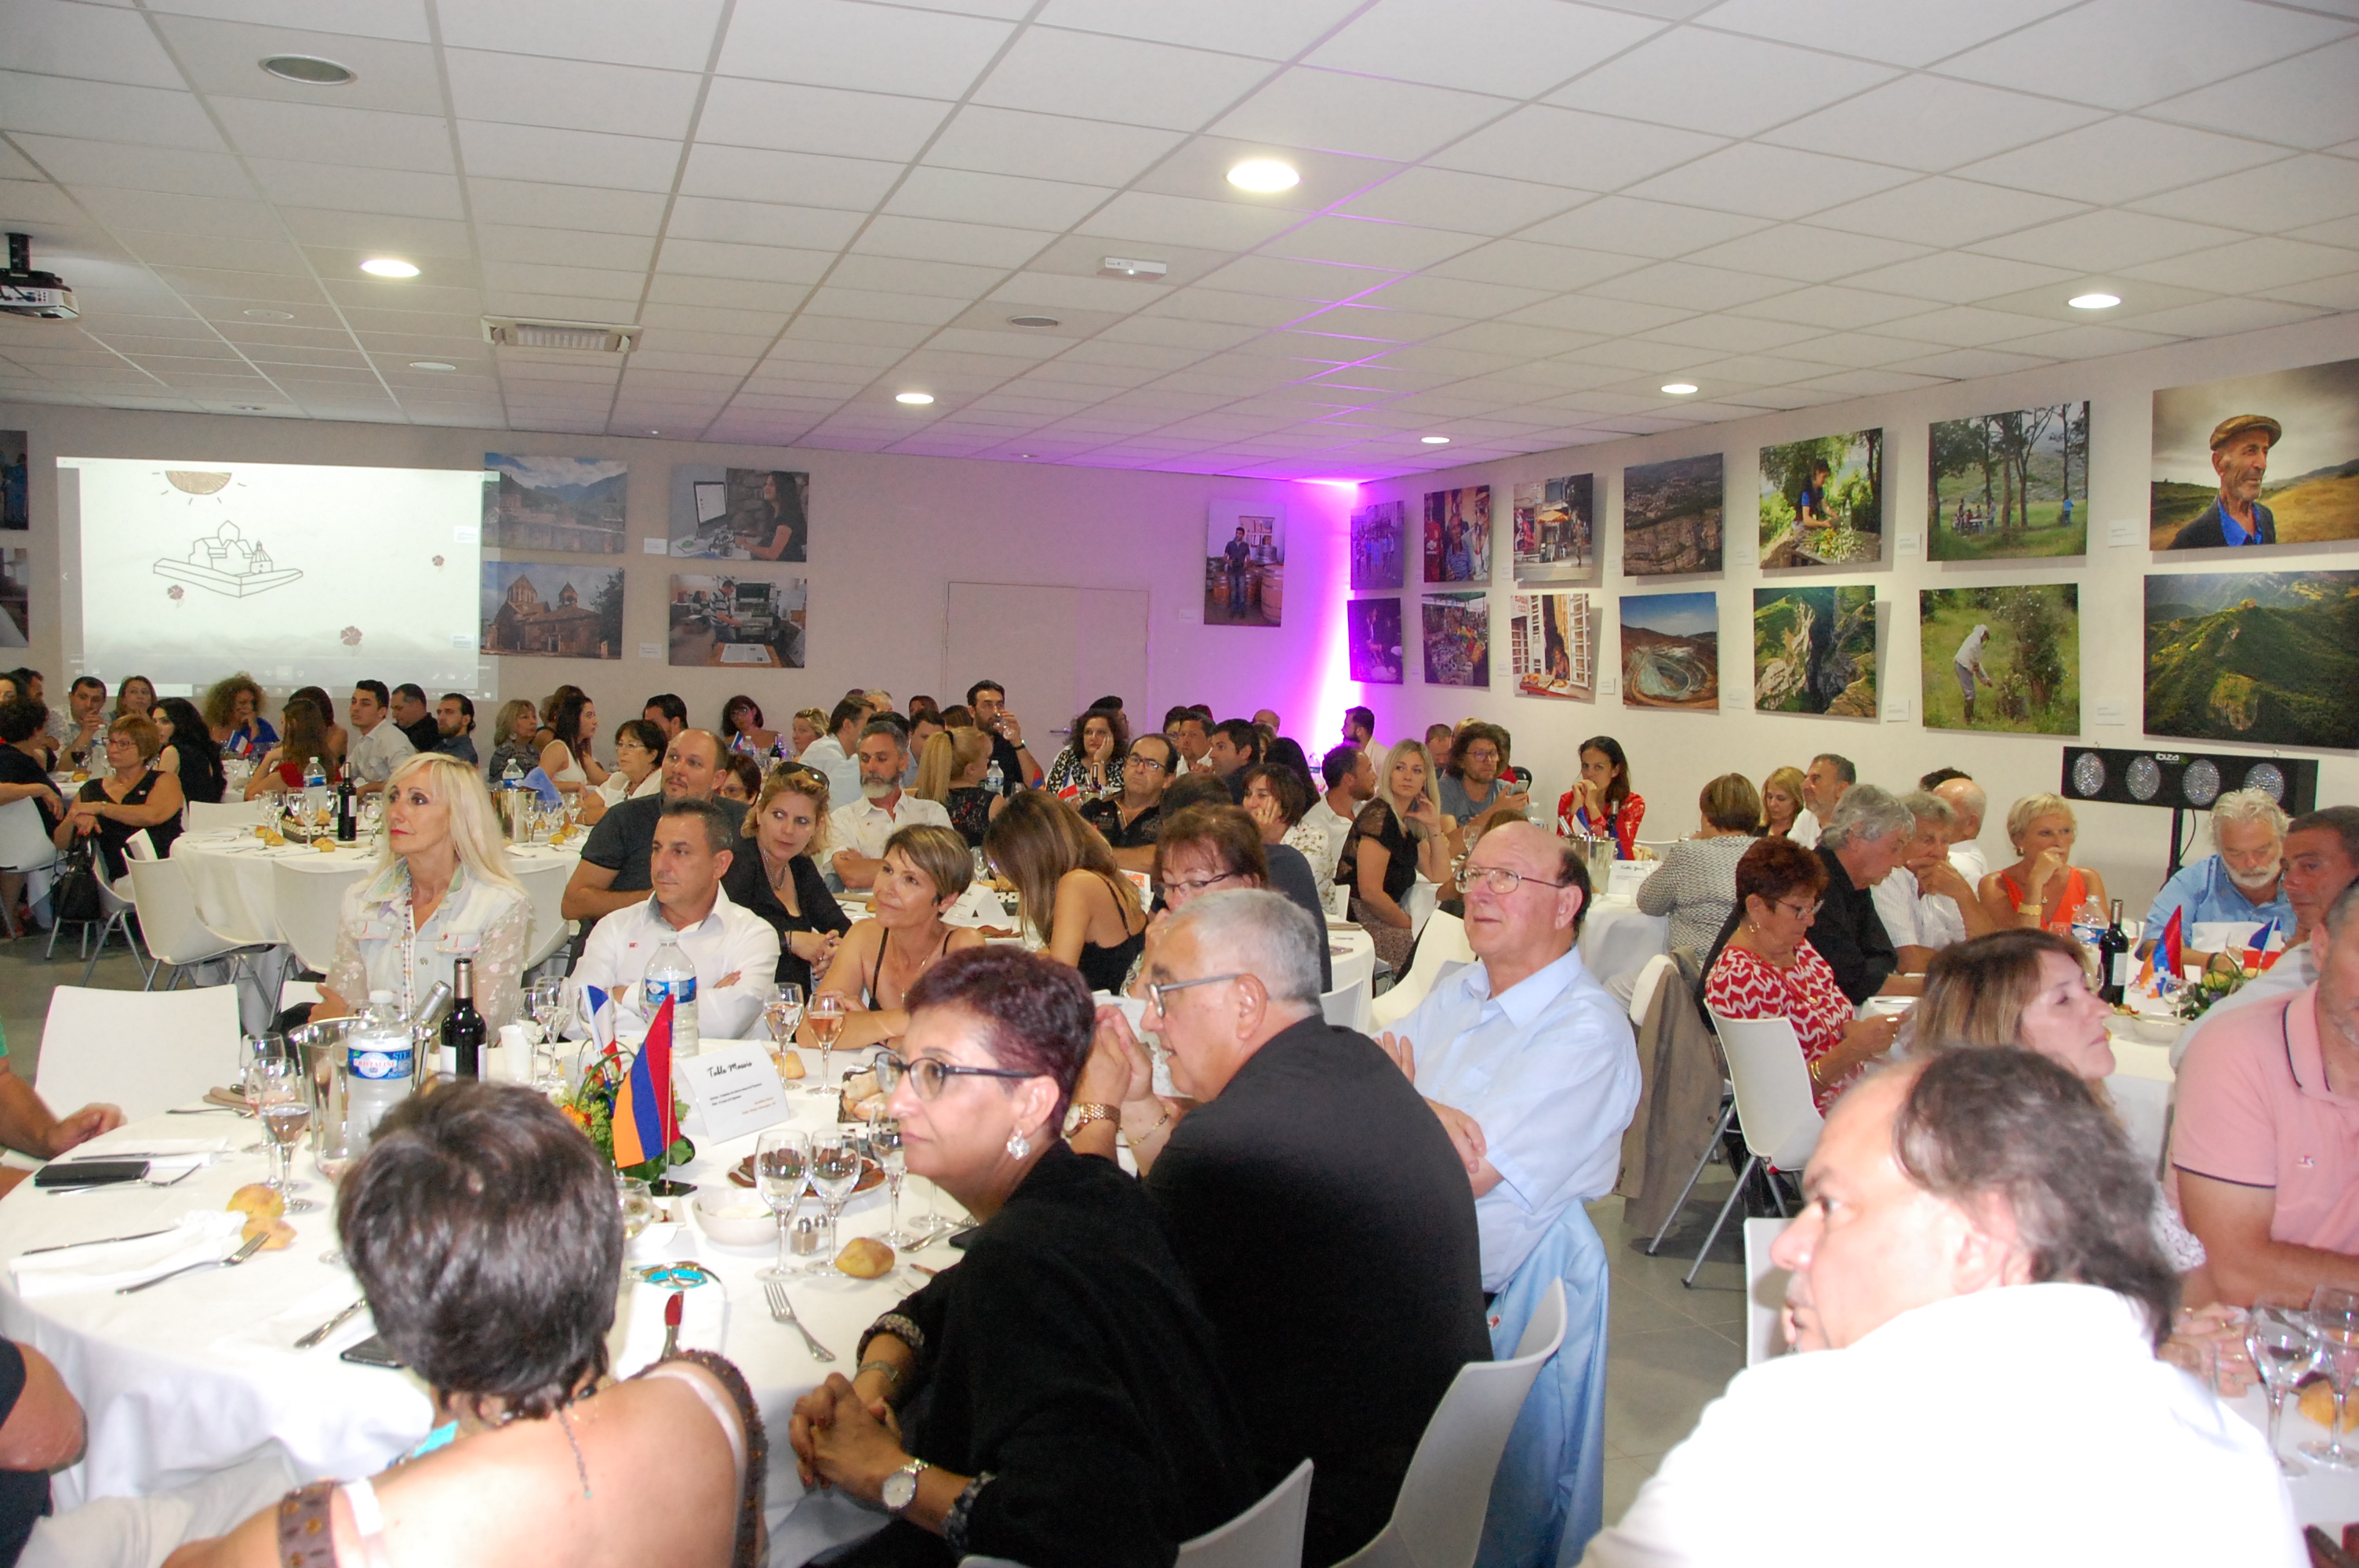 Events within the Frameworks of the “Days of Artsakh in France” Started in Martigues